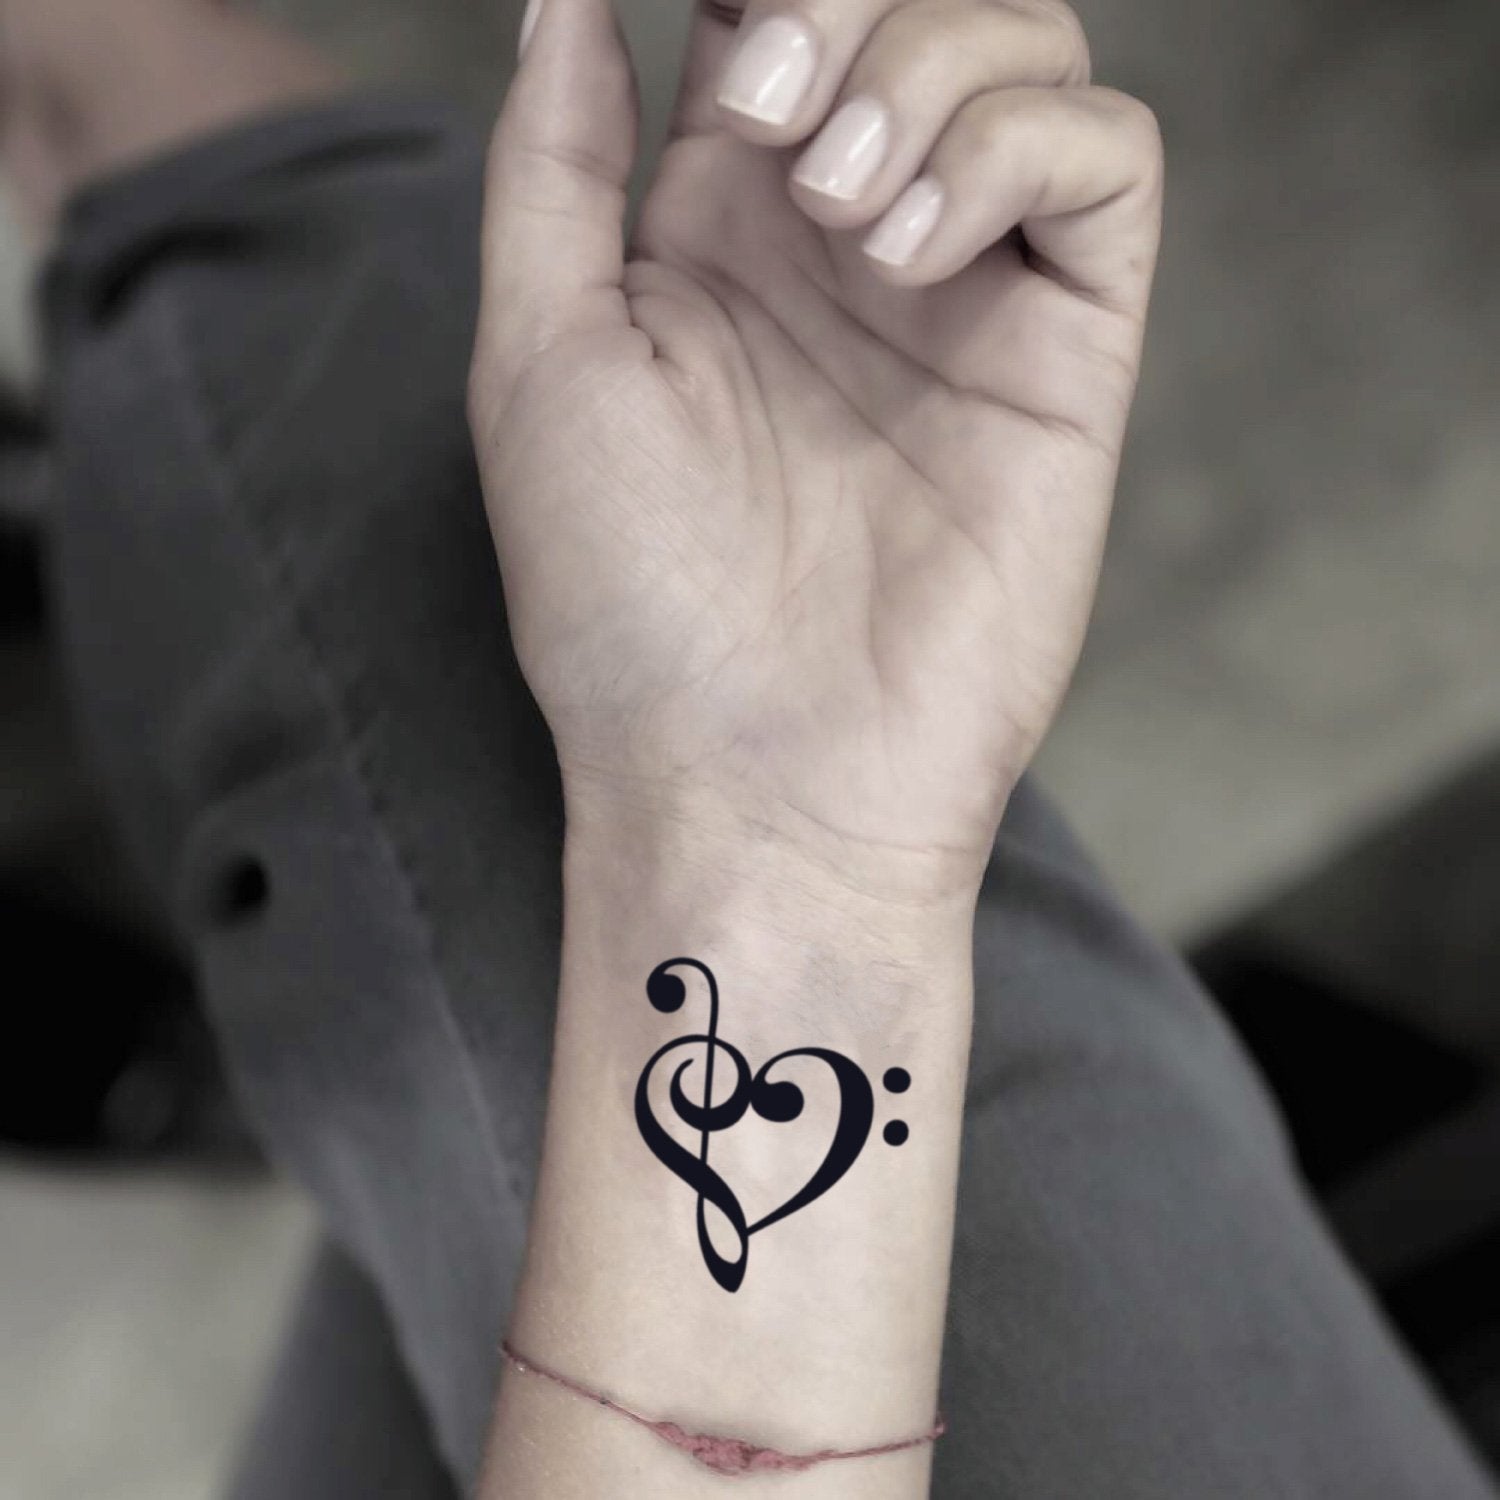 Heart Music Note Tattoo Photos and Images | Shutterstock